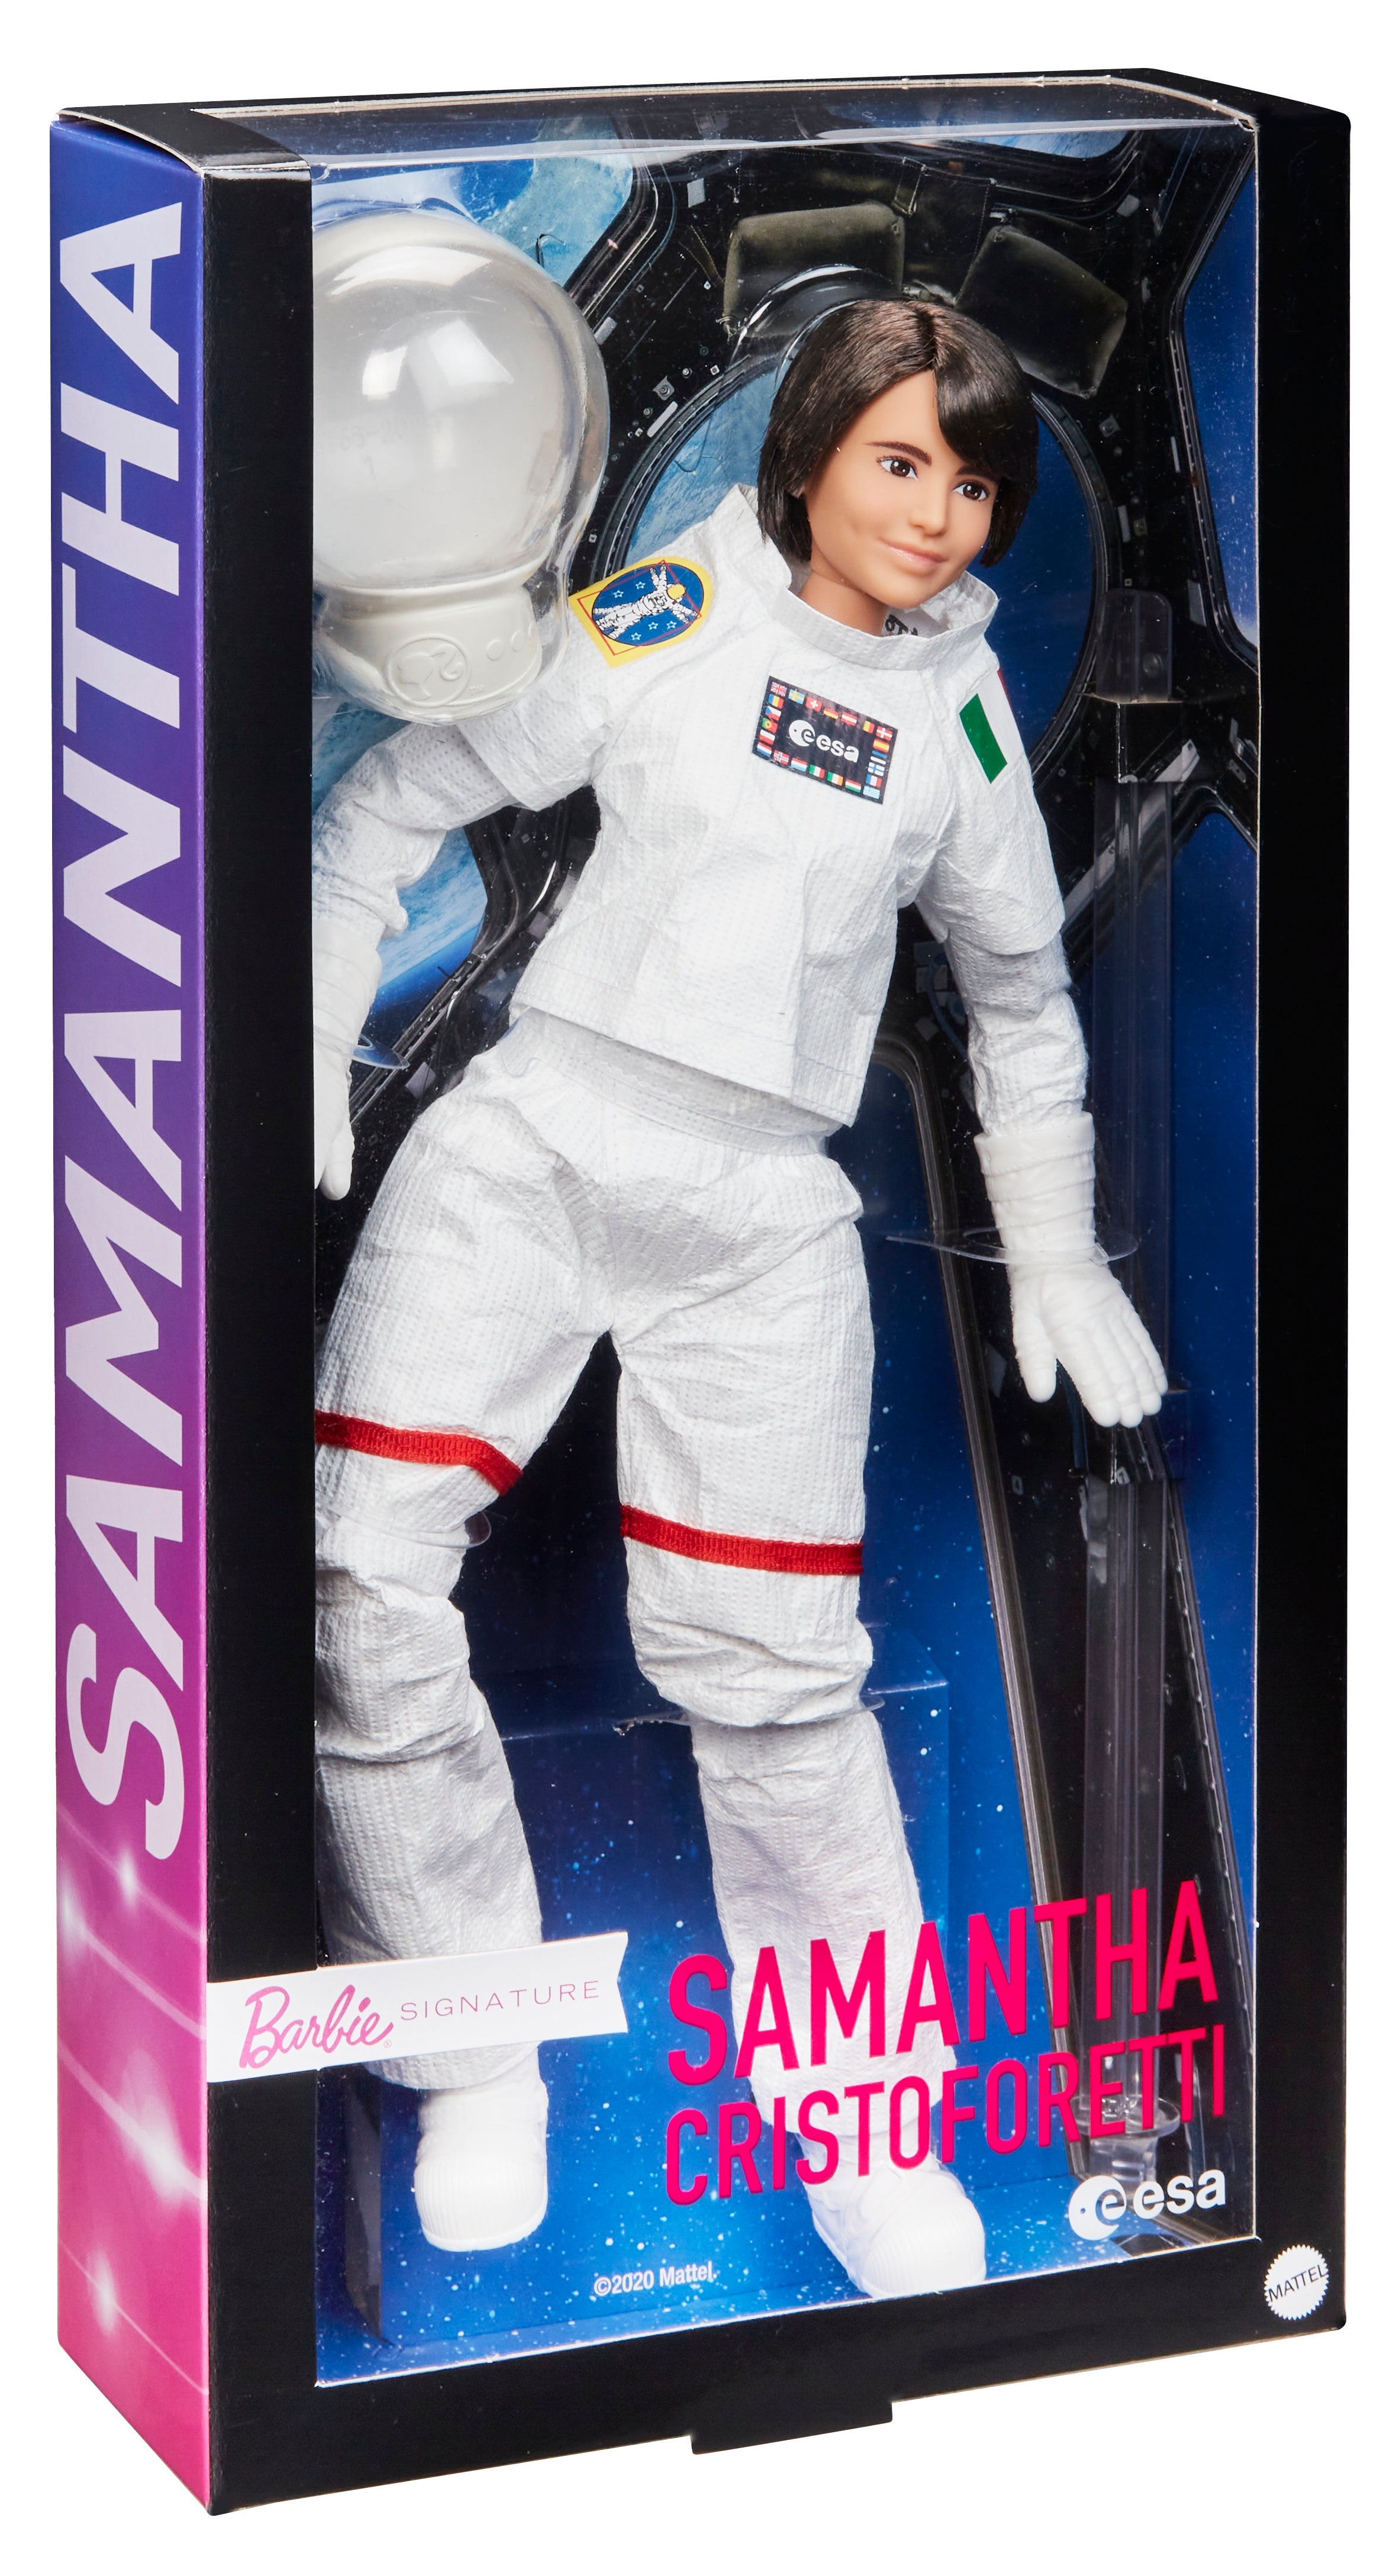 Barbie teams up with ESA & astronaut Samantha Cristoferetti for space week in 2021. Credit: ESA.